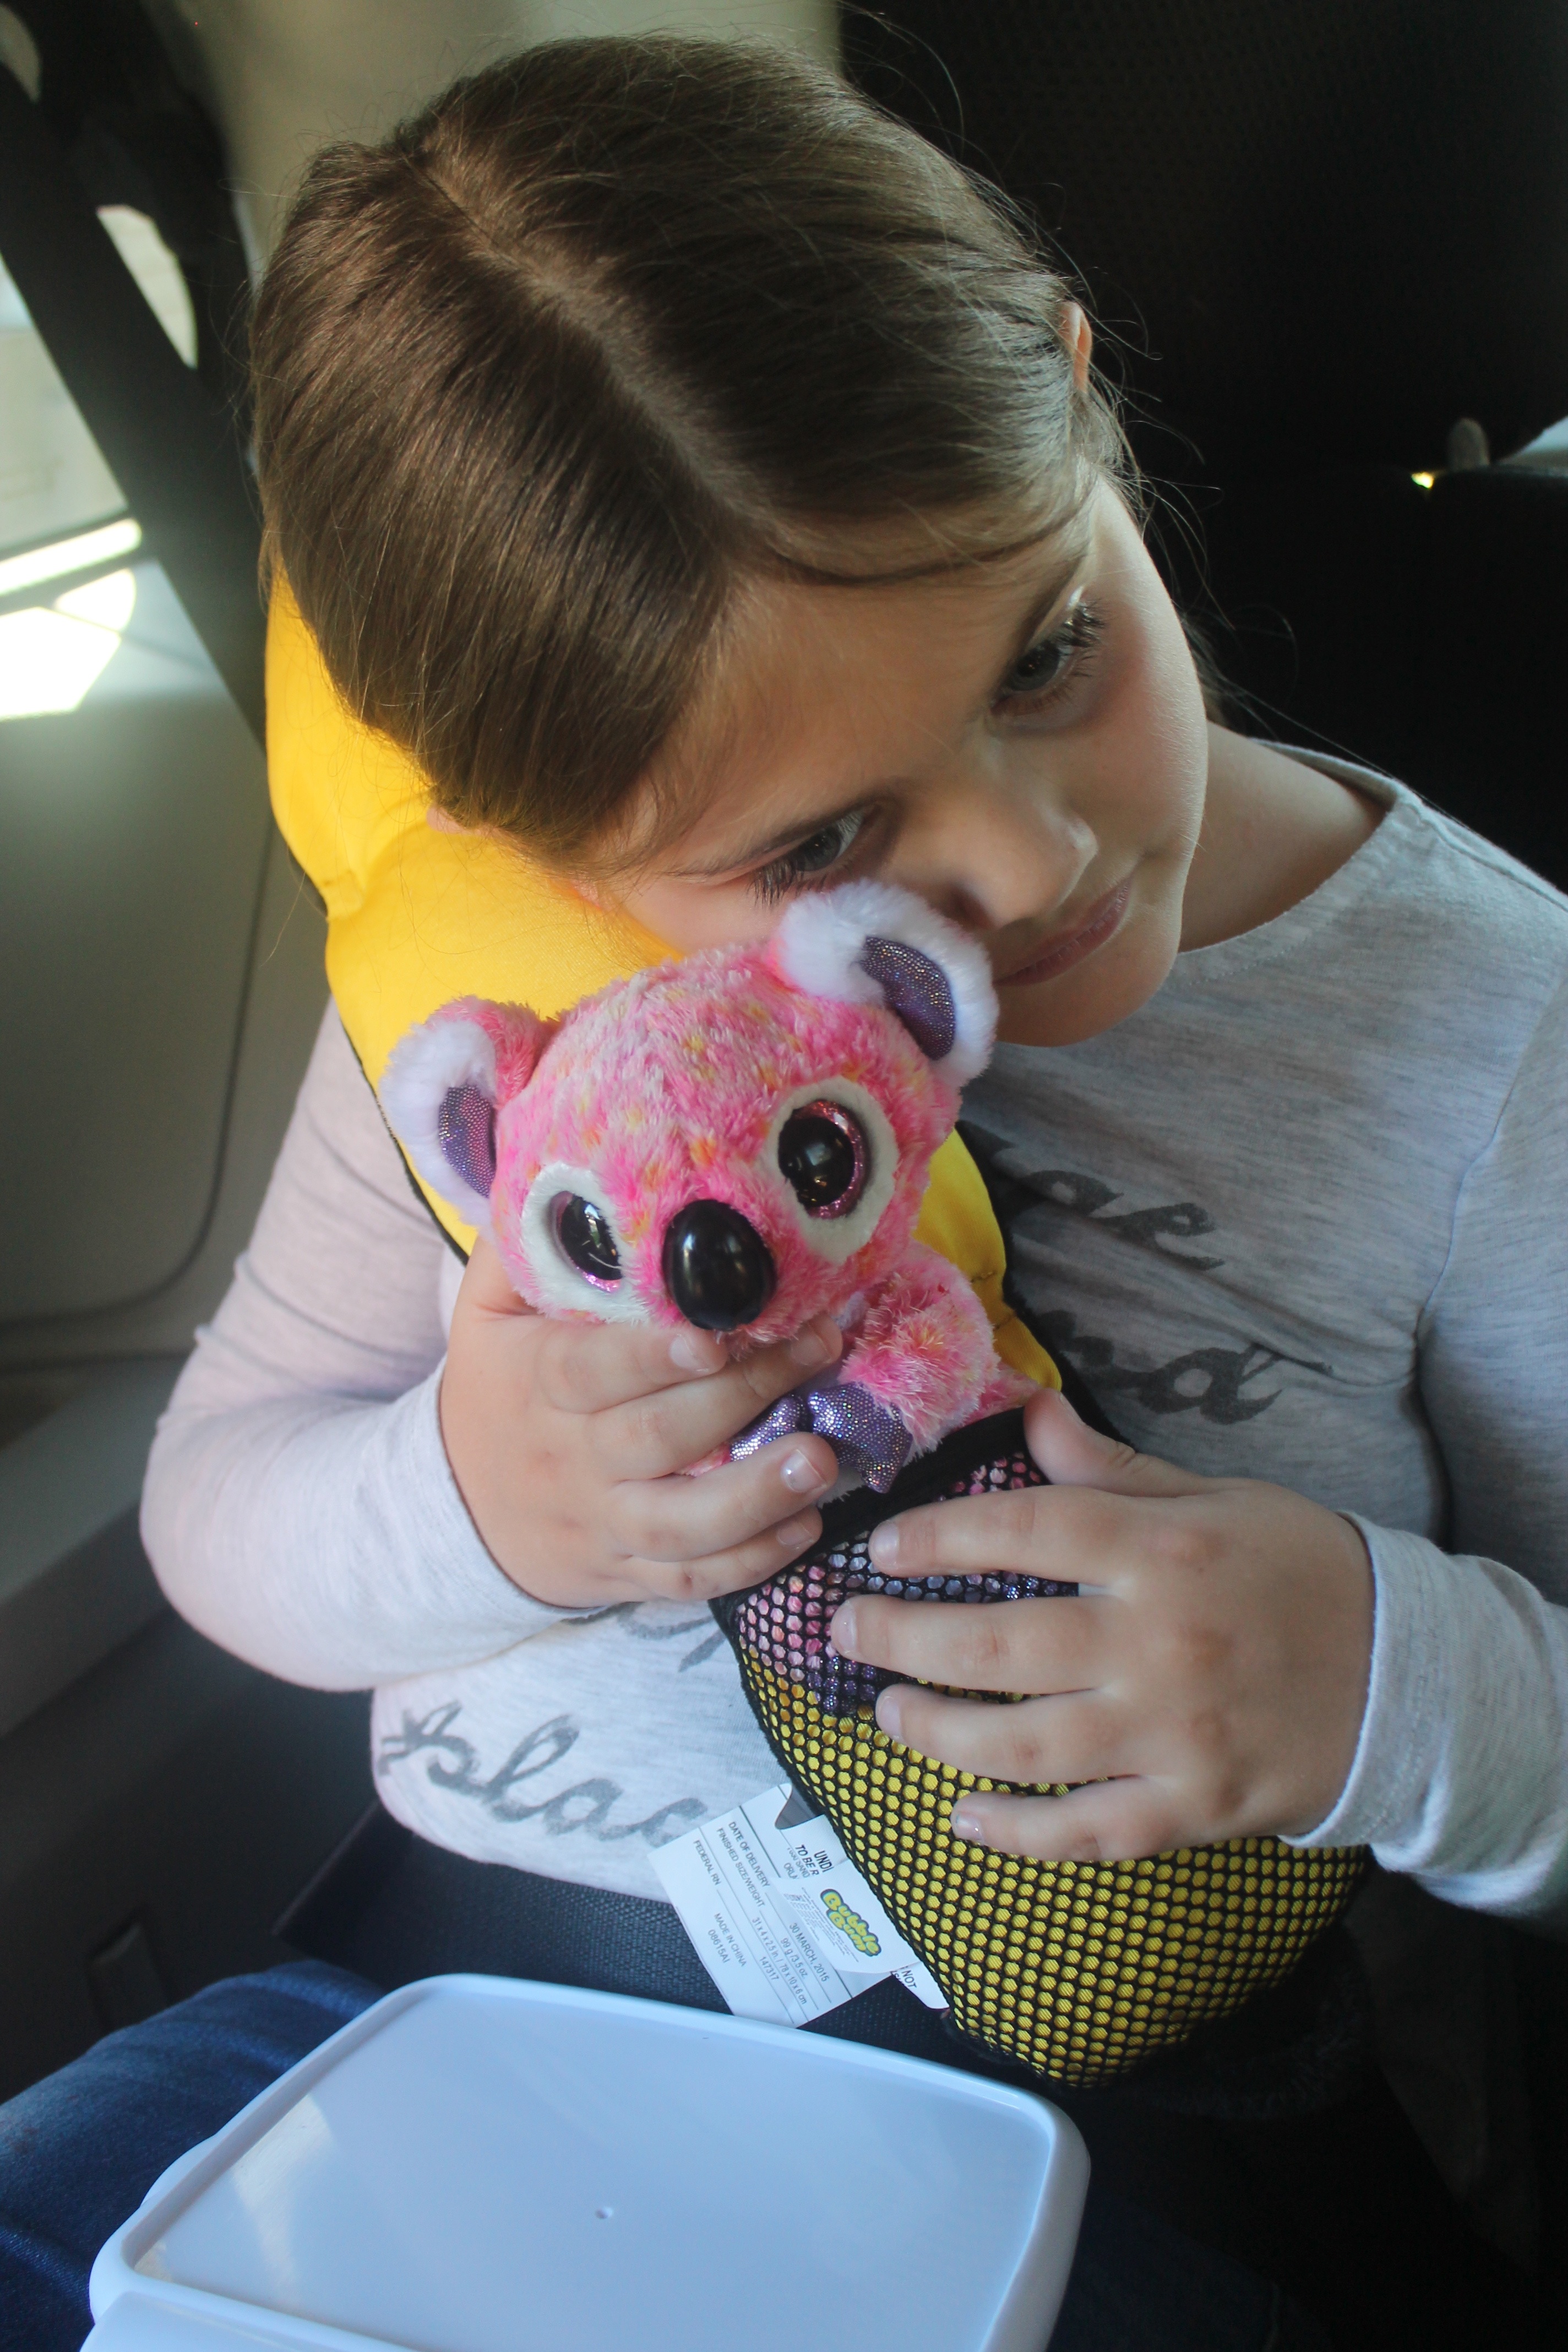 Getting your kids from here to there when they are still in carseats can be daunting. See how it's getting easier with these carpooling solutions with BubbleBum.